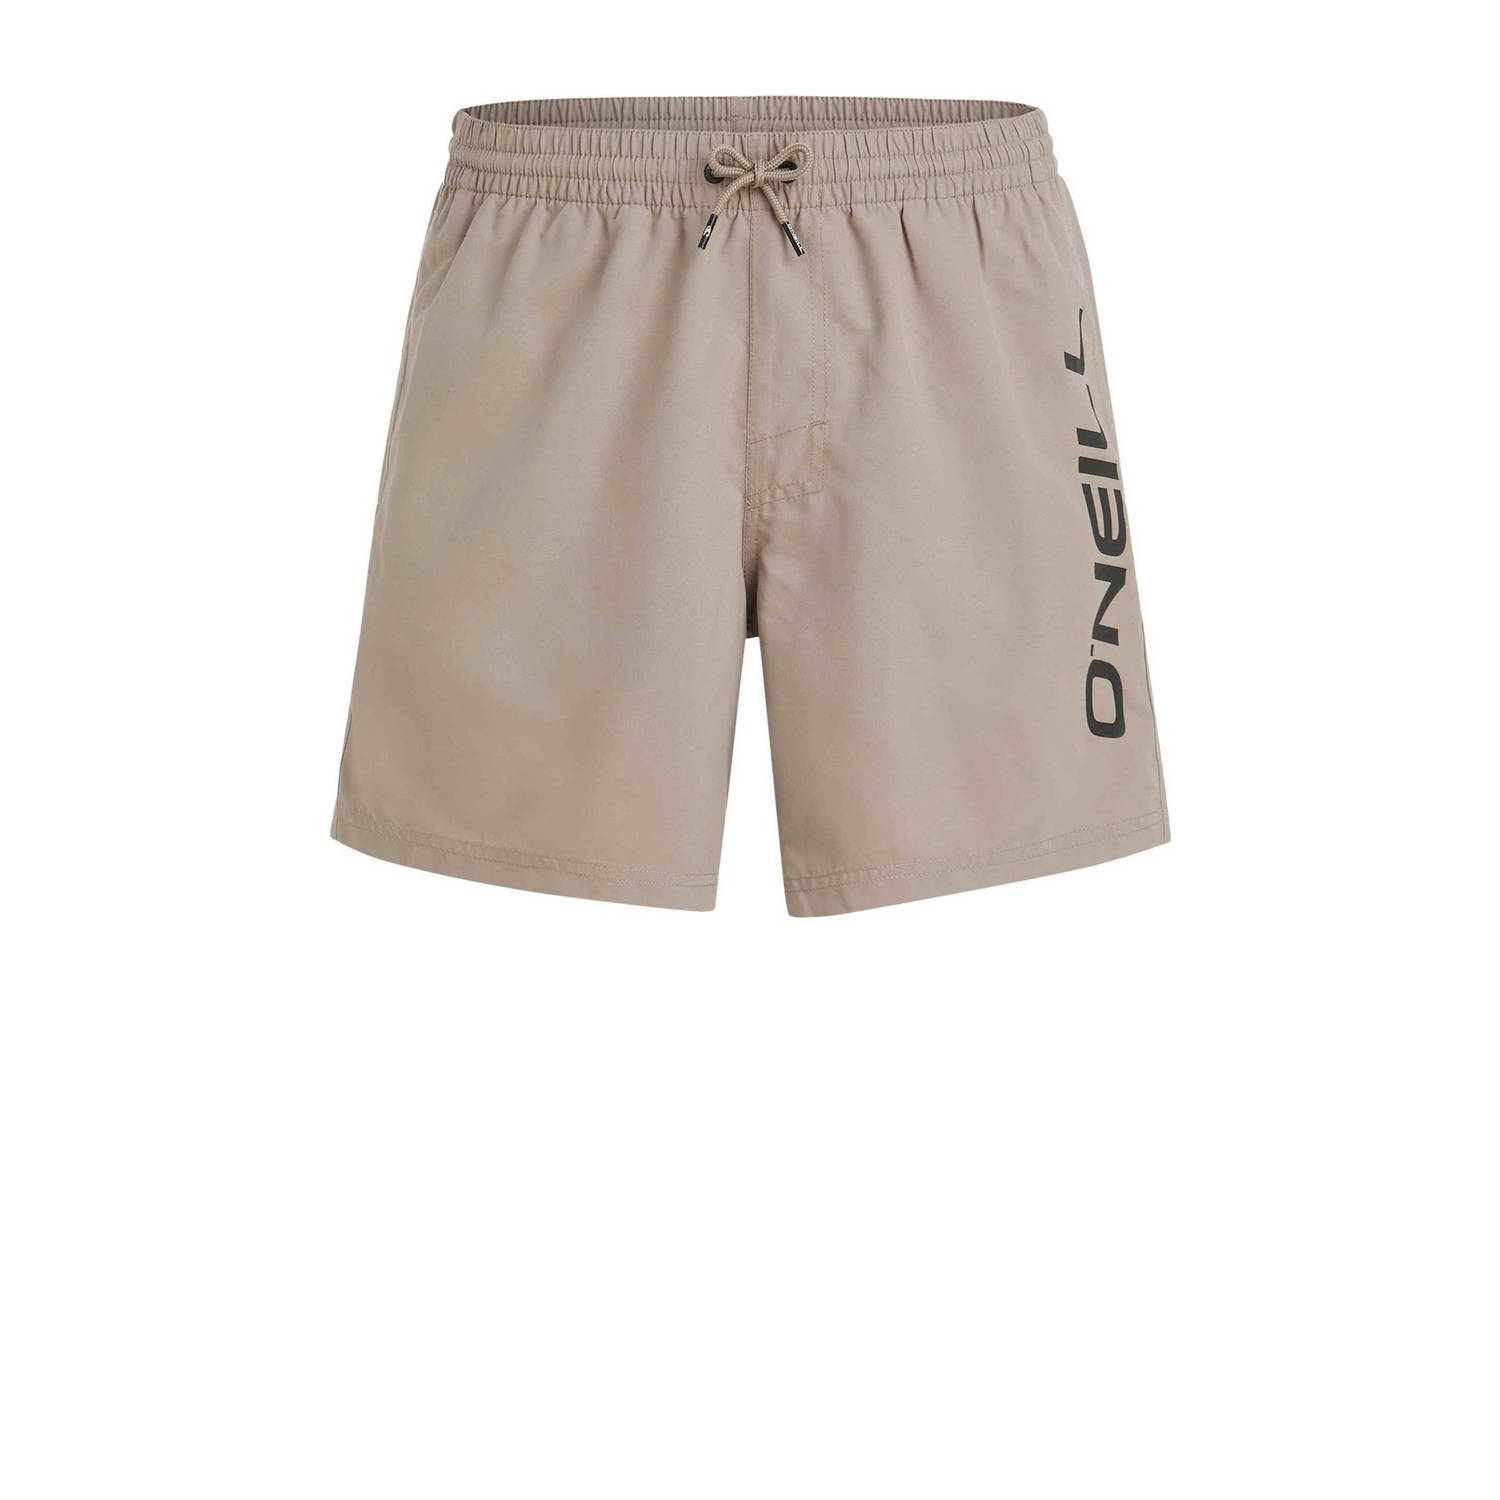 O'Neill zwemshort Cali taupe